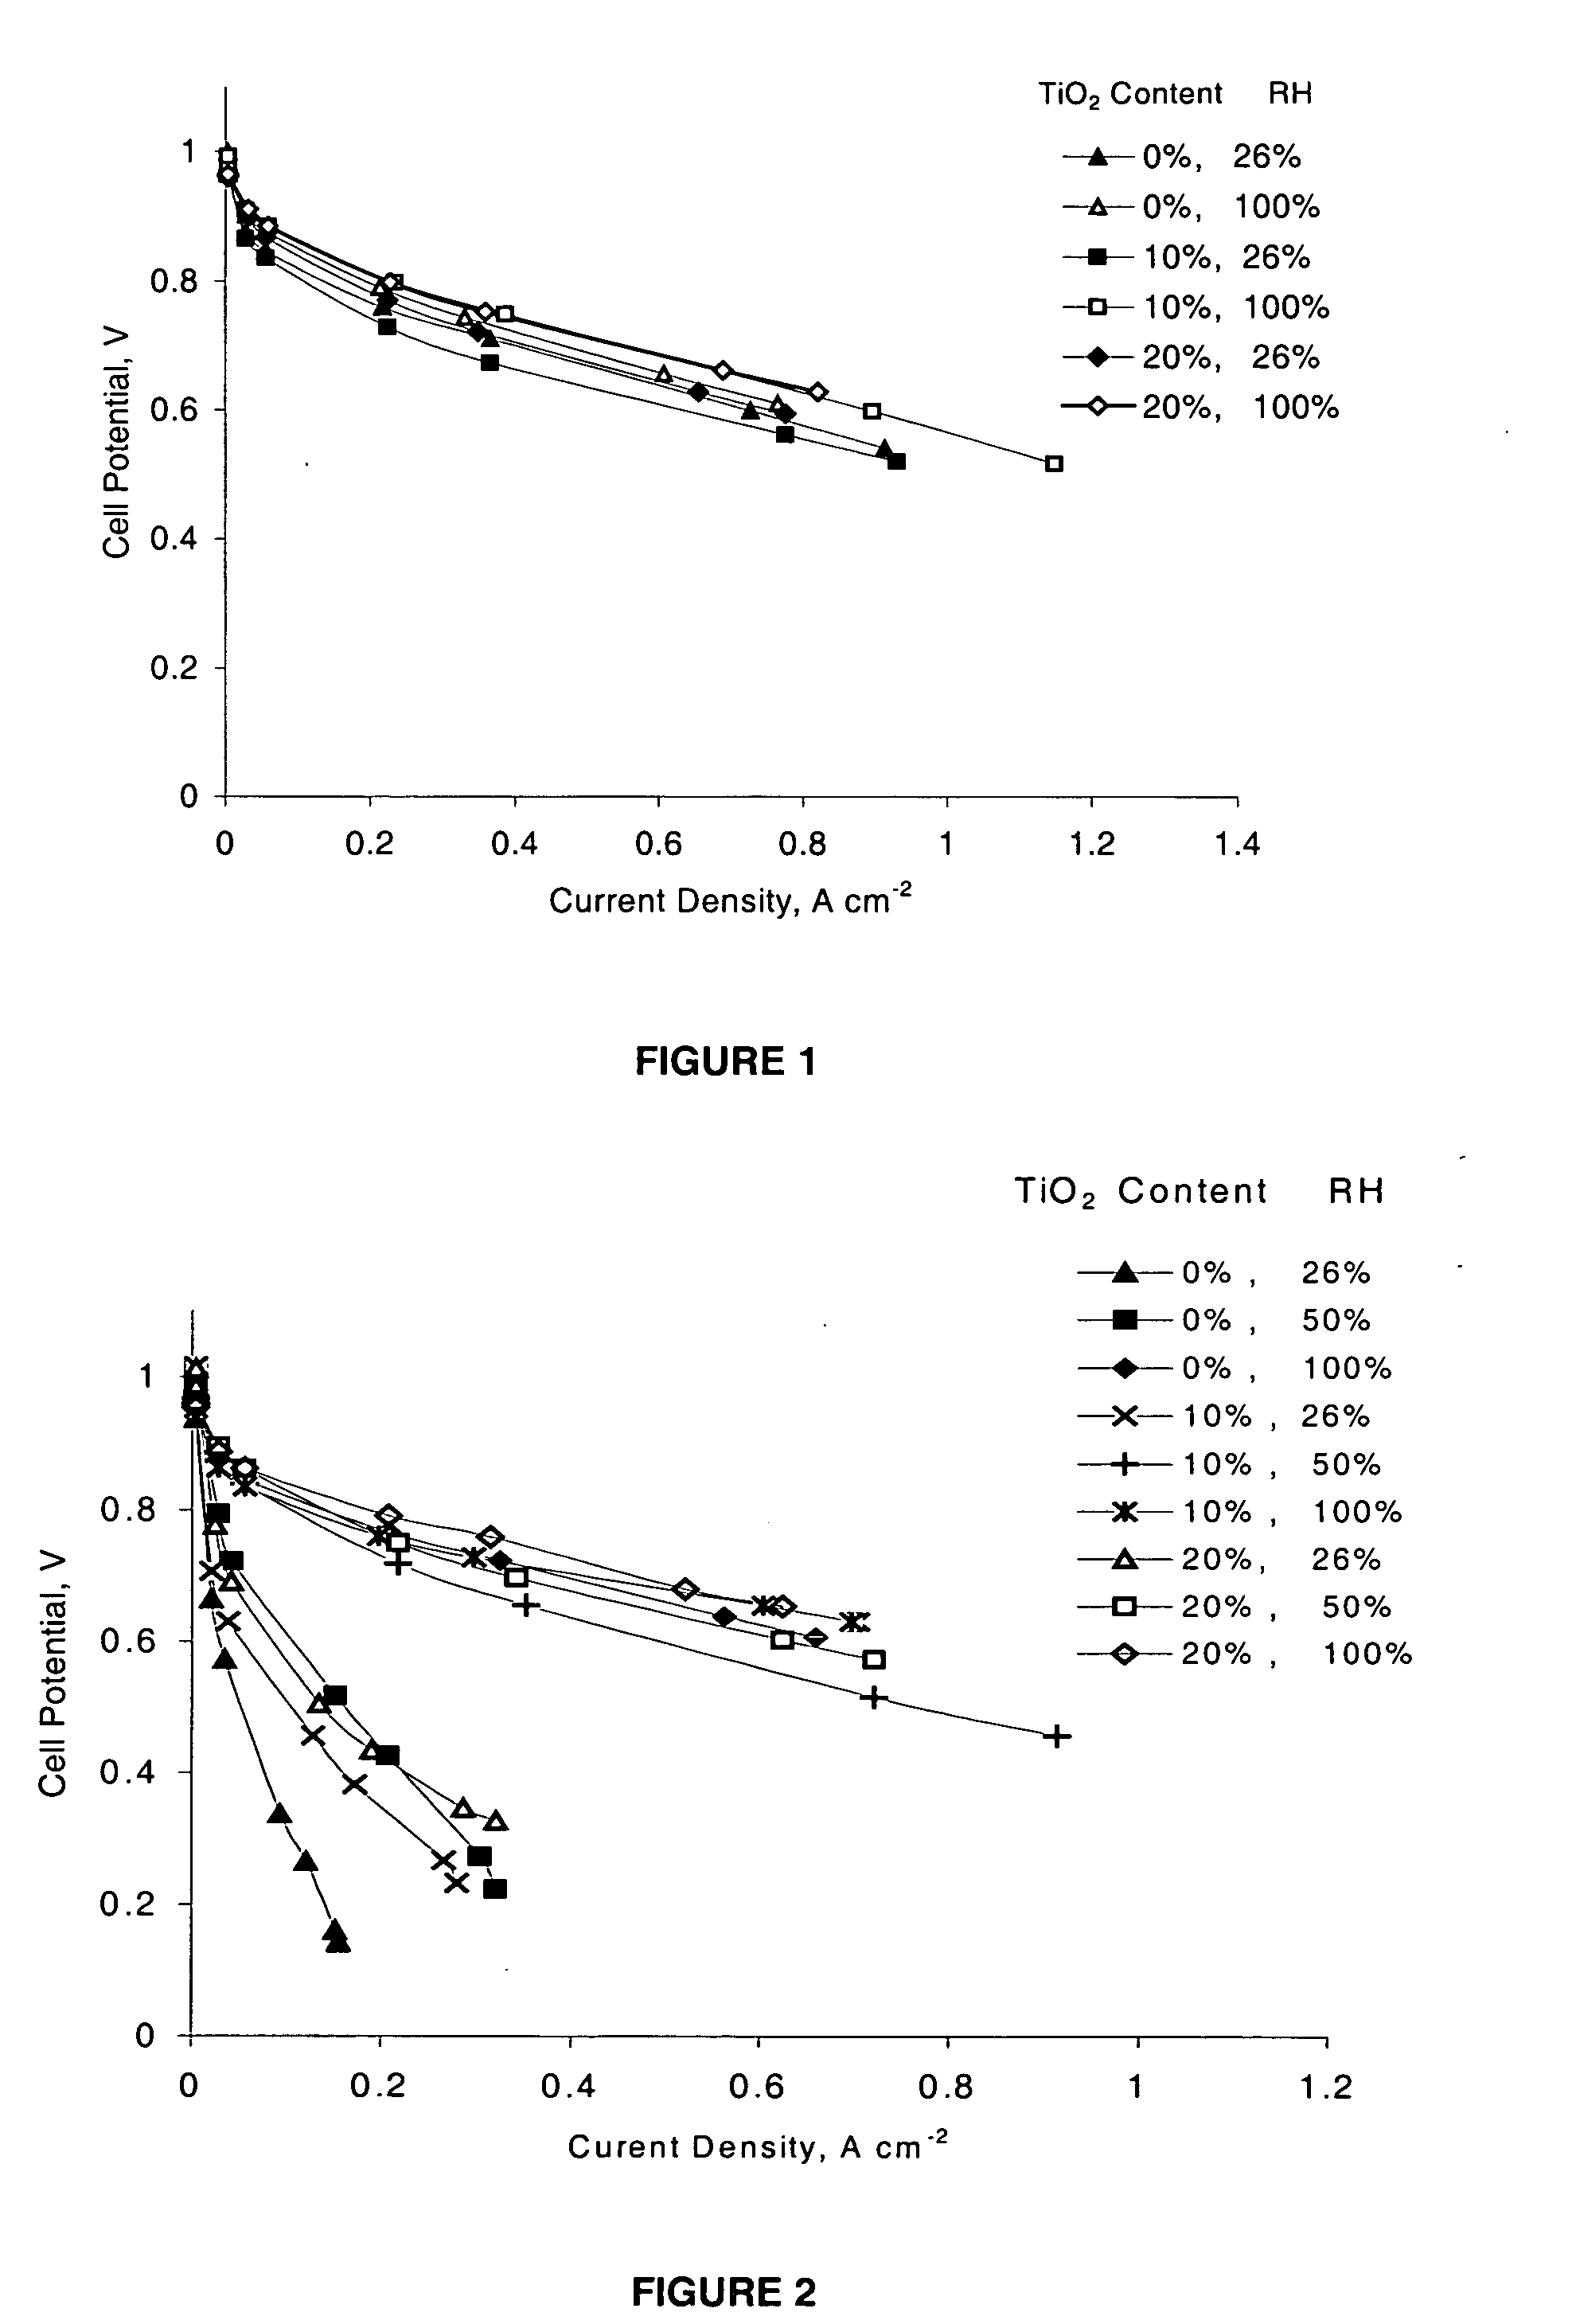 Composite membrane for fuel cell and fuel cells incorporating said membranes